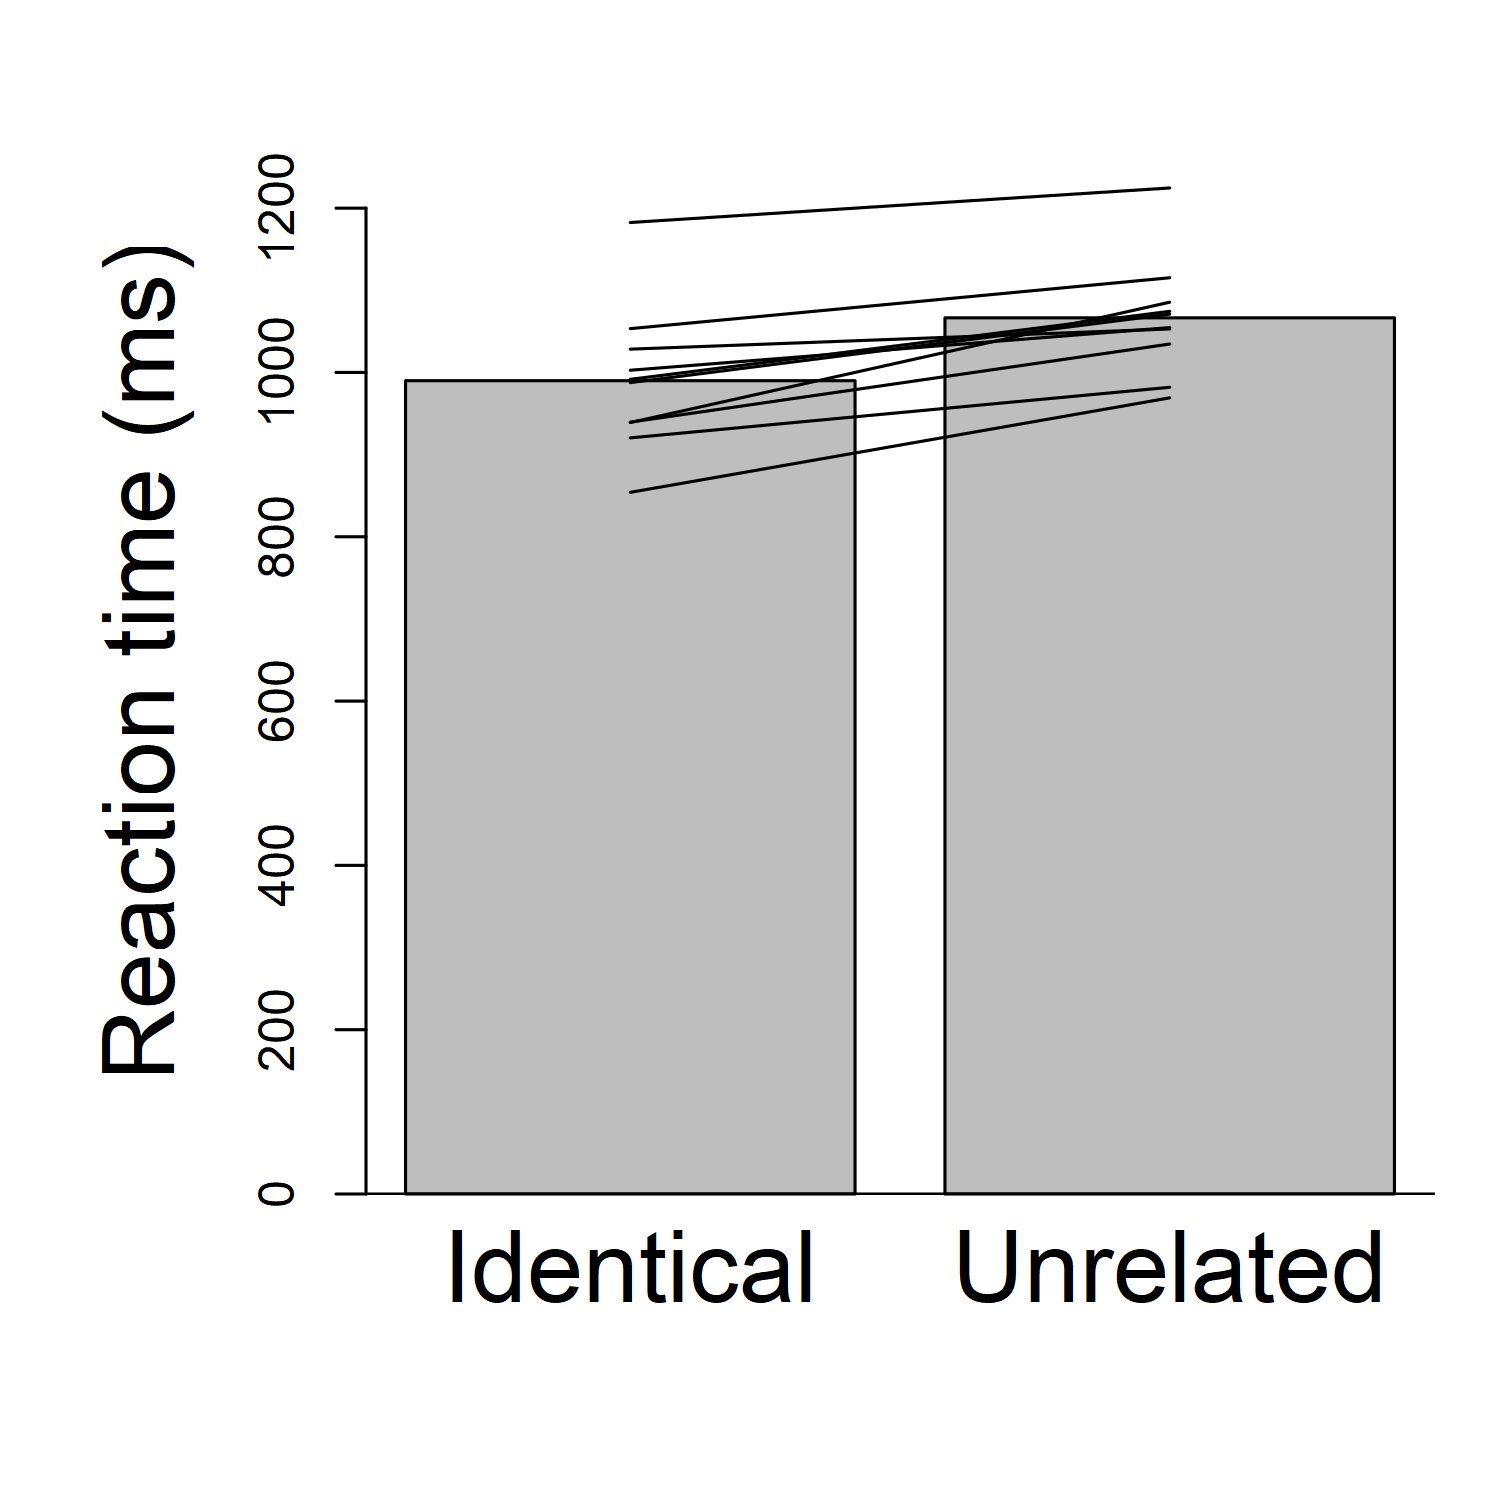 The same bar plot as shown before, but now with slanting lines indicating the "identical" and "unrelated" times for each participant.